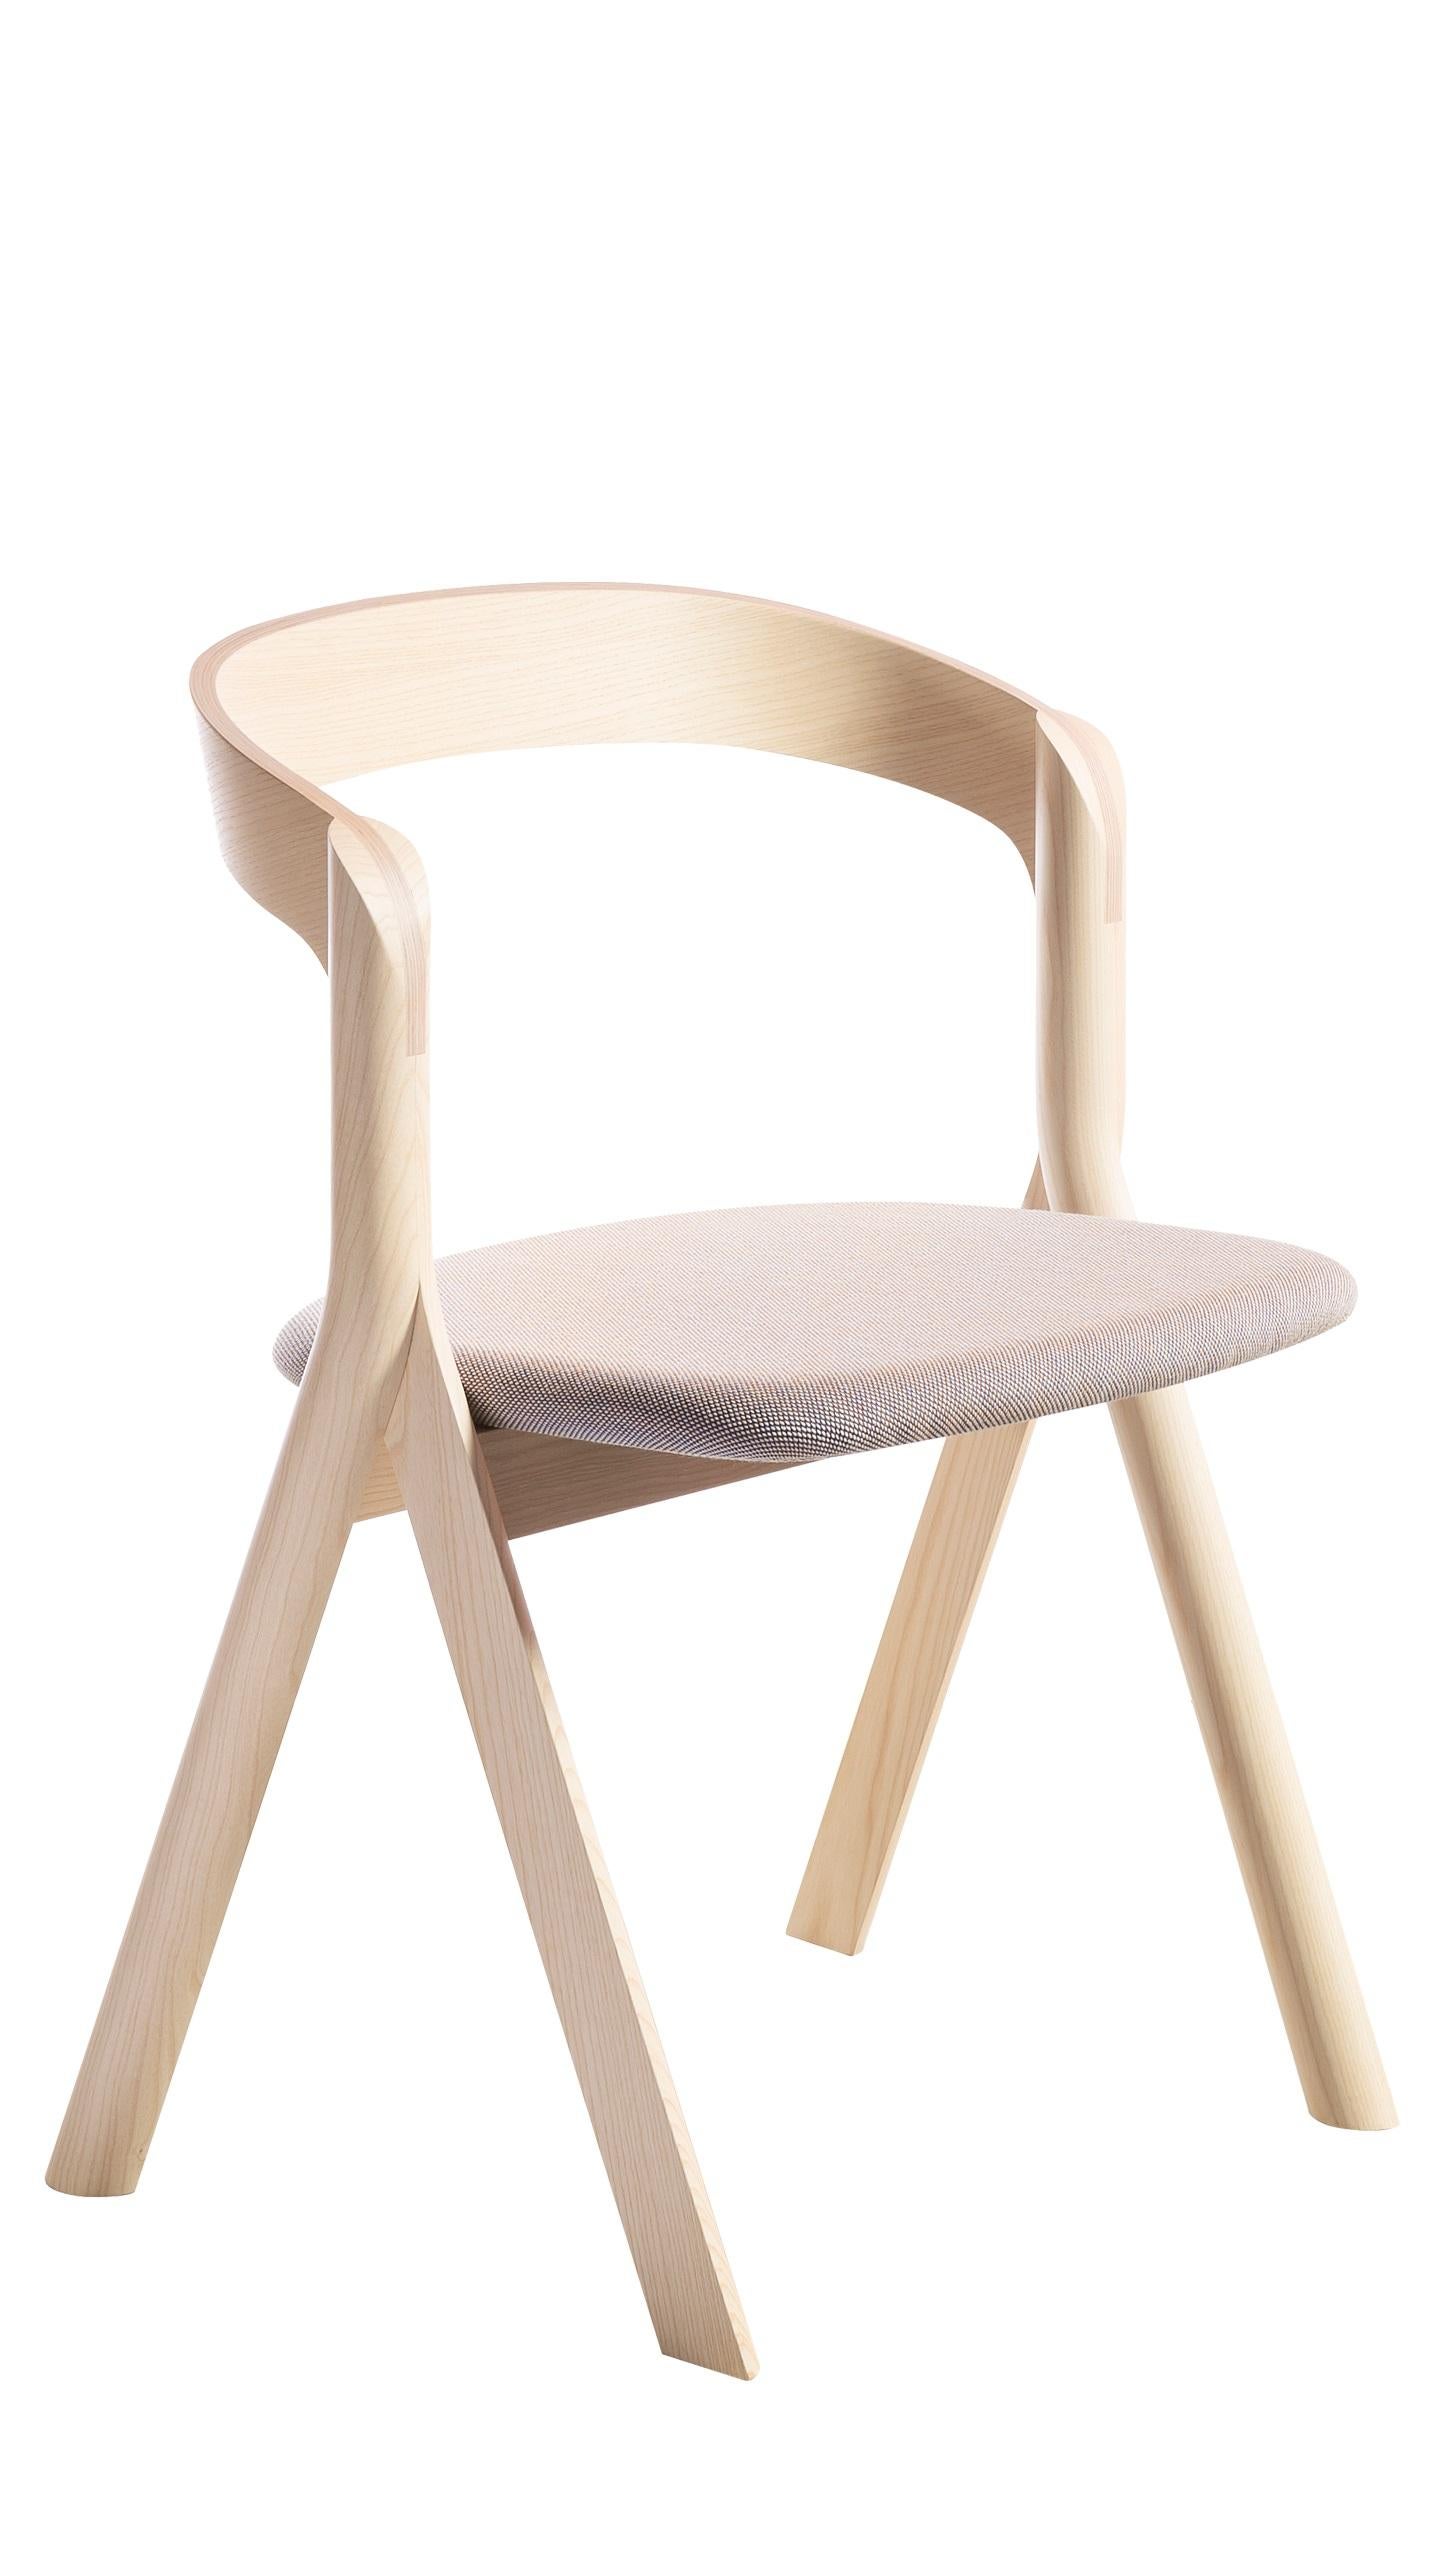 For Sale: Beige (Ash Wood) Diverge Chair in Wood Structure, Dove Gray Cushion, by Skrivo Design 2